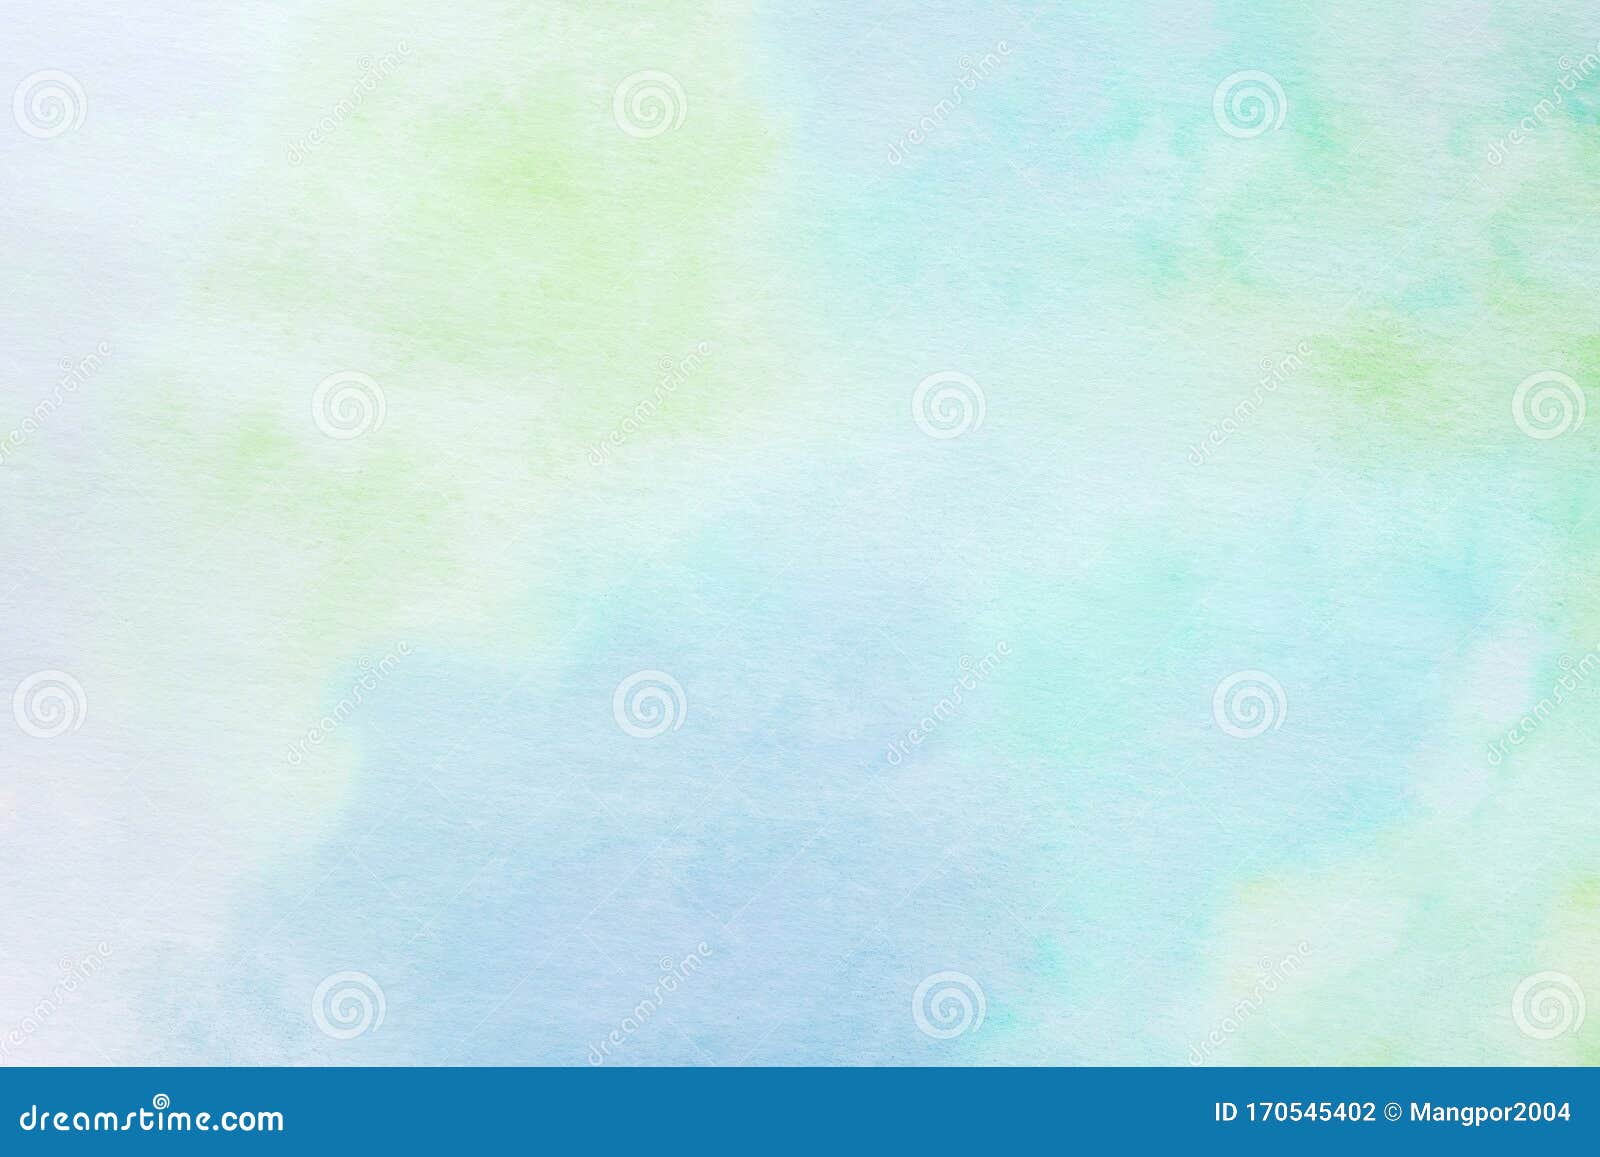 Watercolor Background, Art Abstract Blue Yellow and Green Watercolor ...